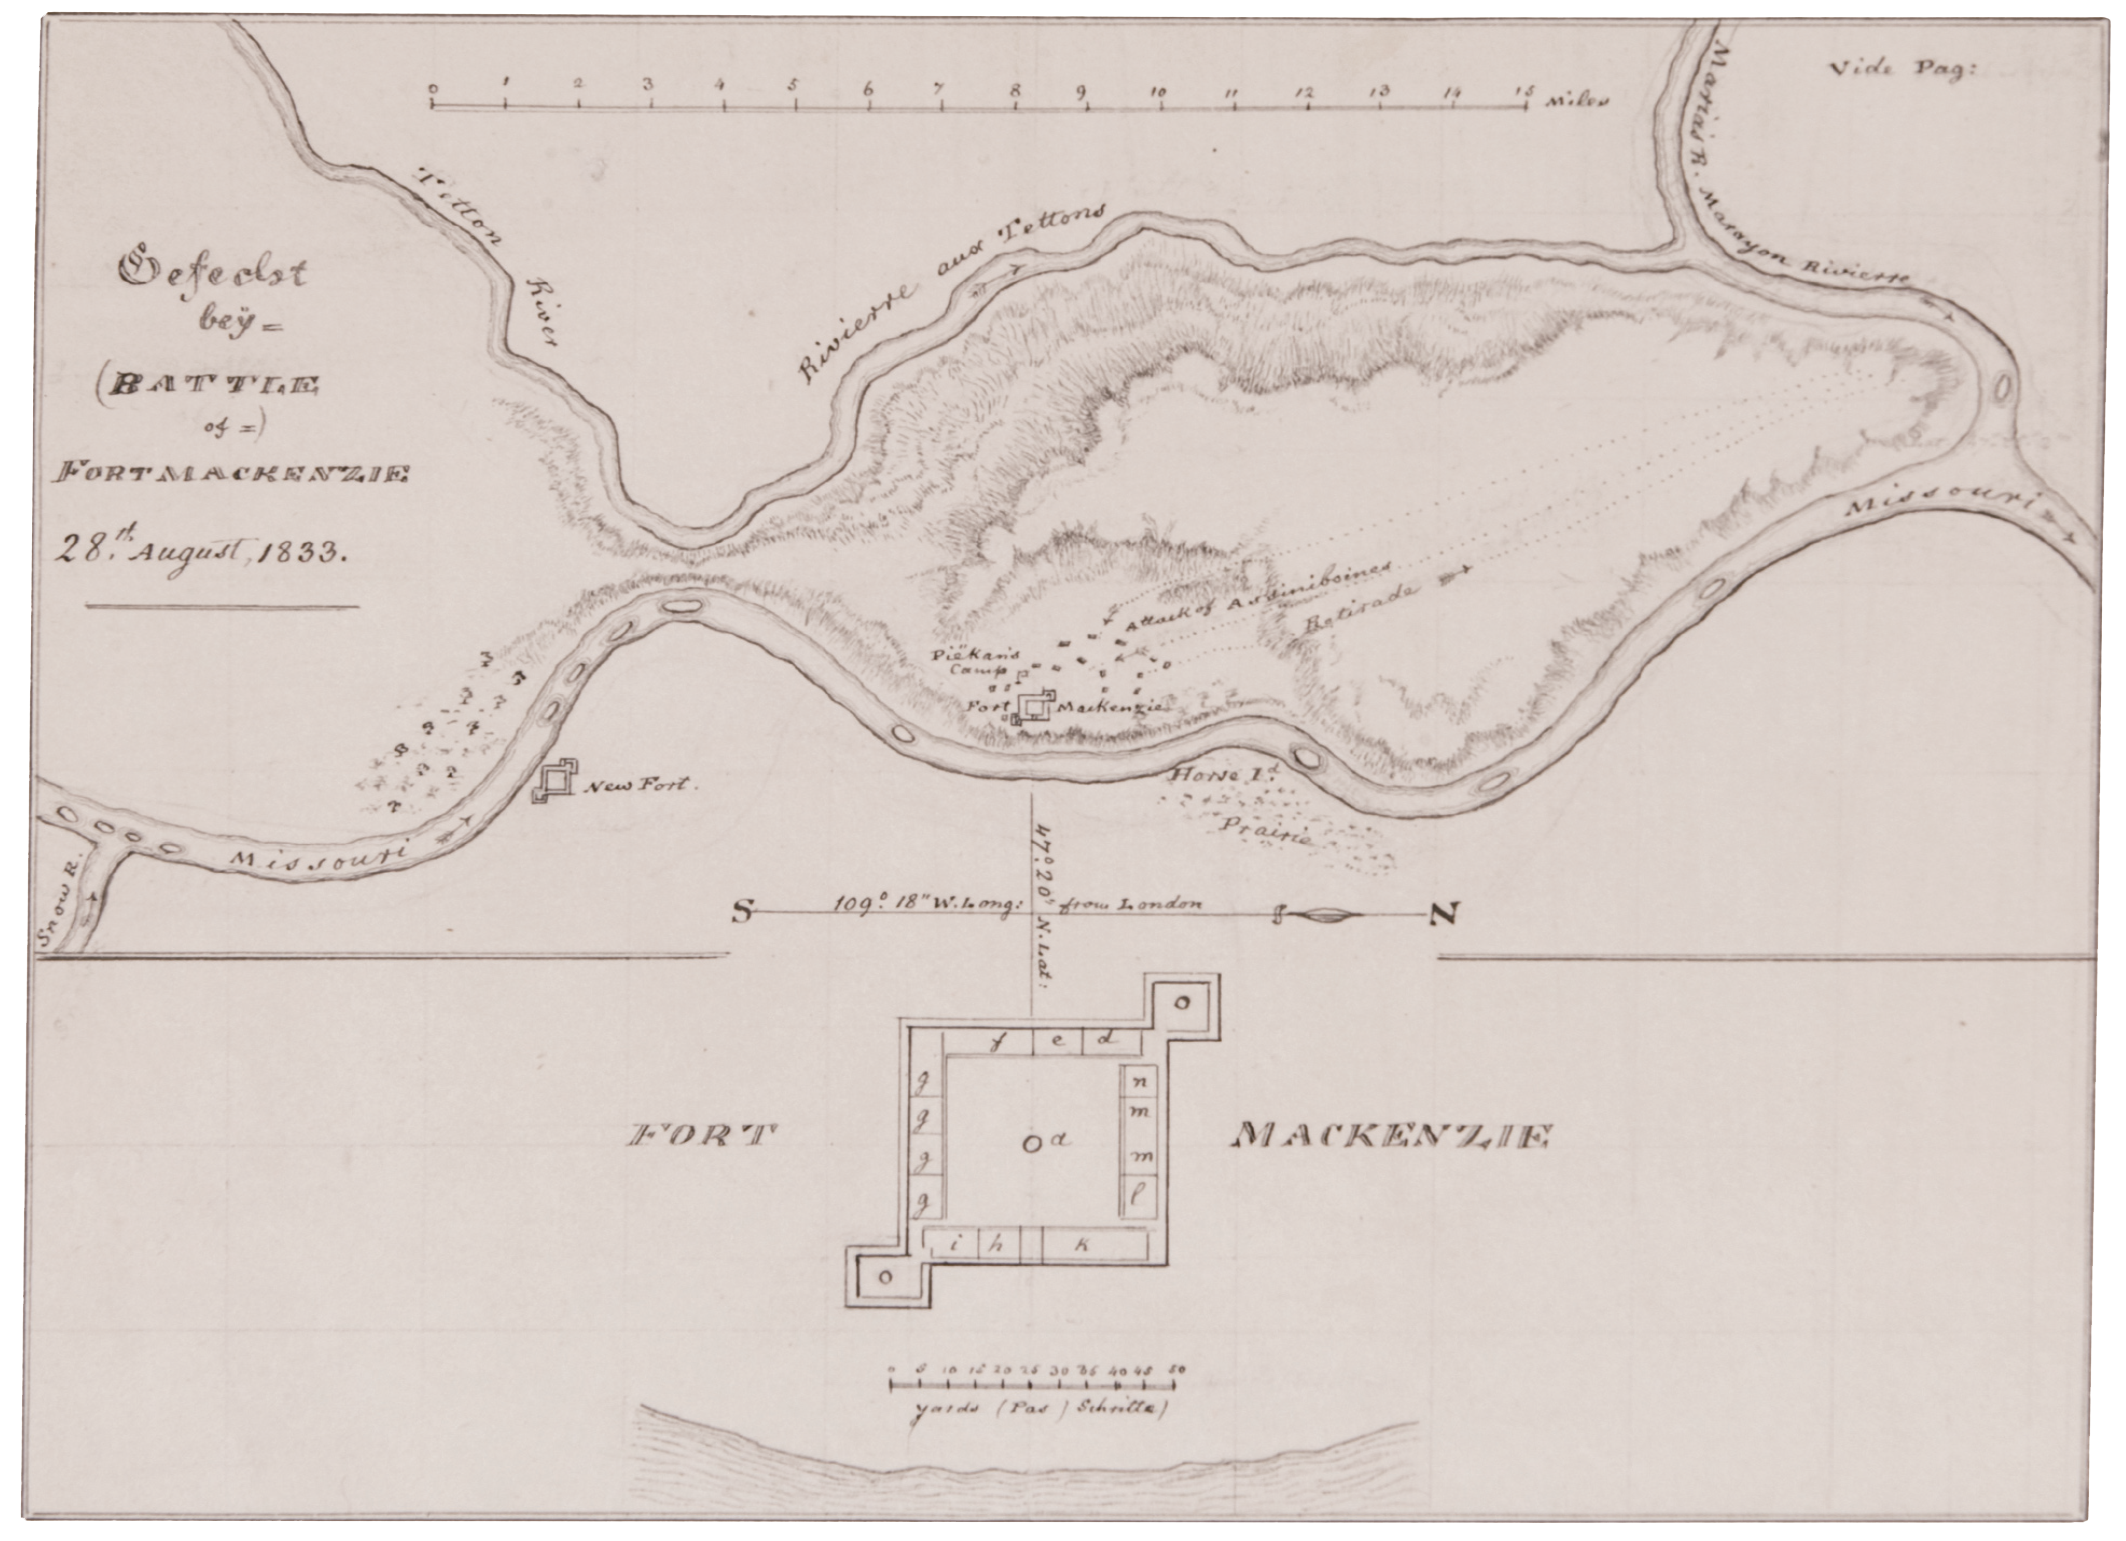 Figure 12.18. Map of the battle at Fort McKenzie.